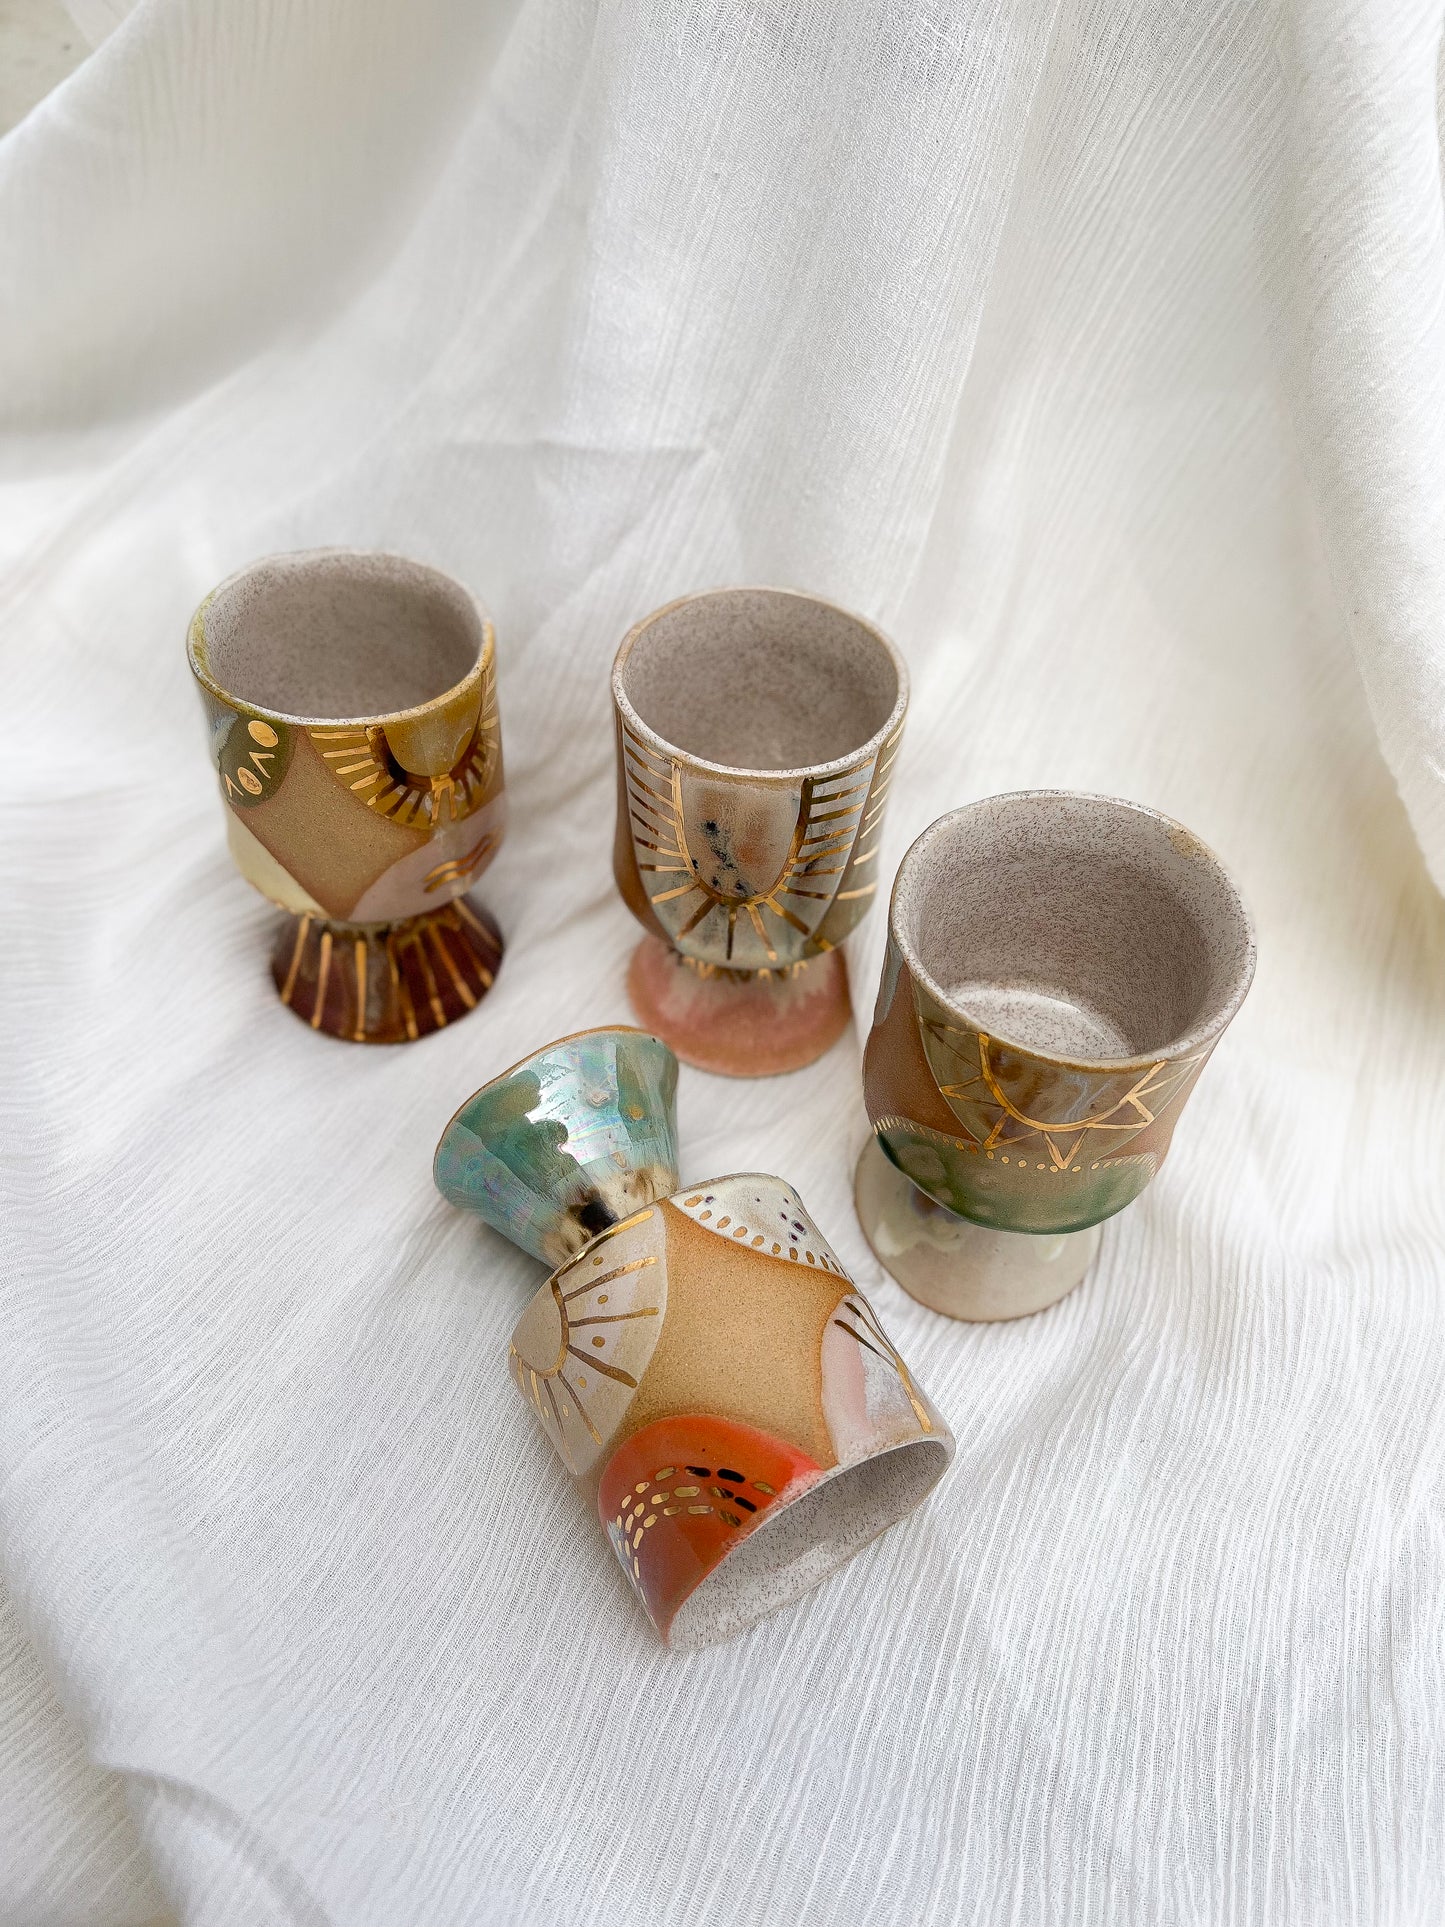 Handmade ceramic mug with stem that is just perfect for all of your entertaining needs (including cocktails). Features gold luster accents for all of your celebrations and sure to impress.